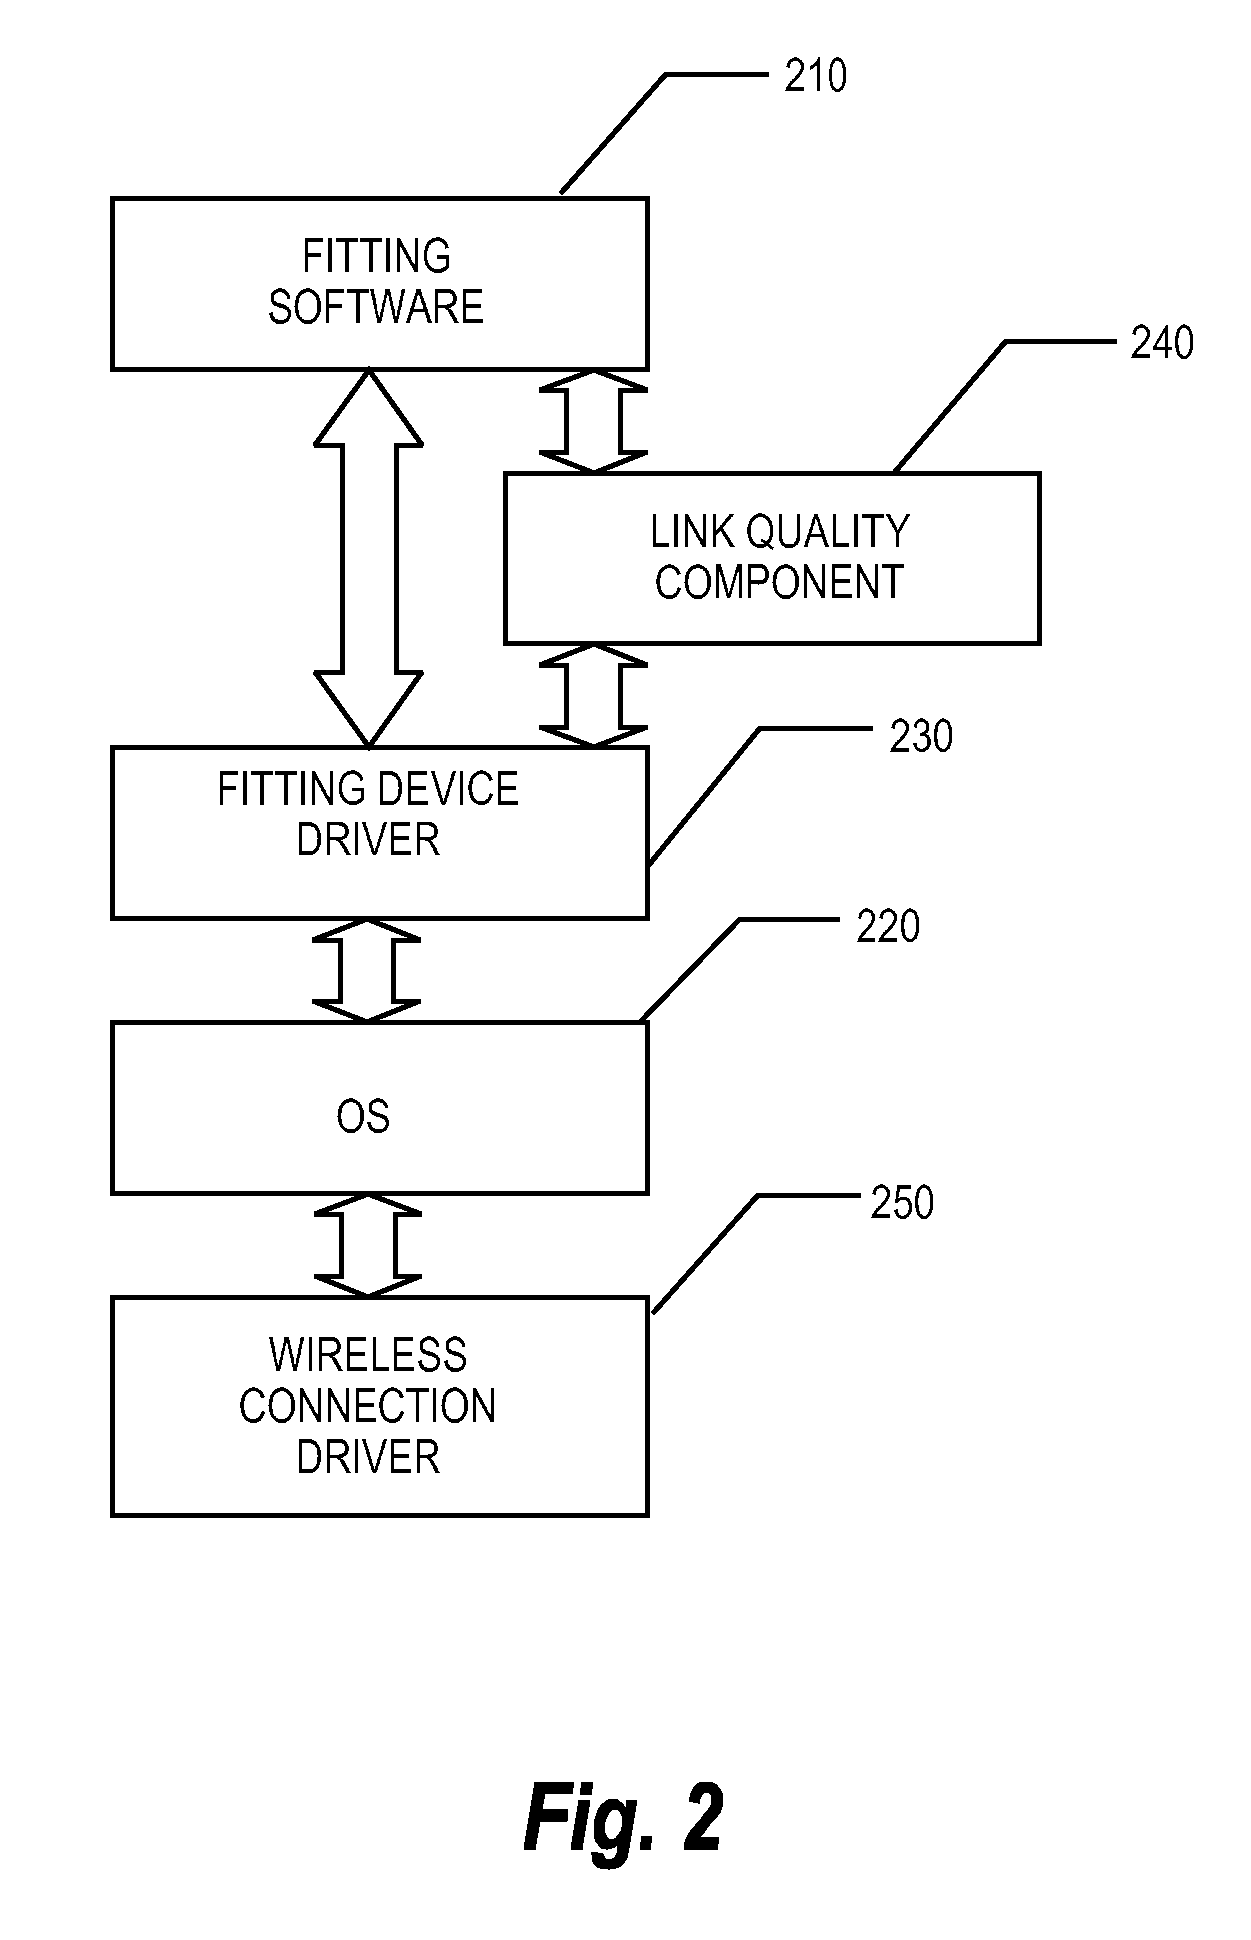 Method and system for surveillance of a wireless connection in a hearing aid fitting system